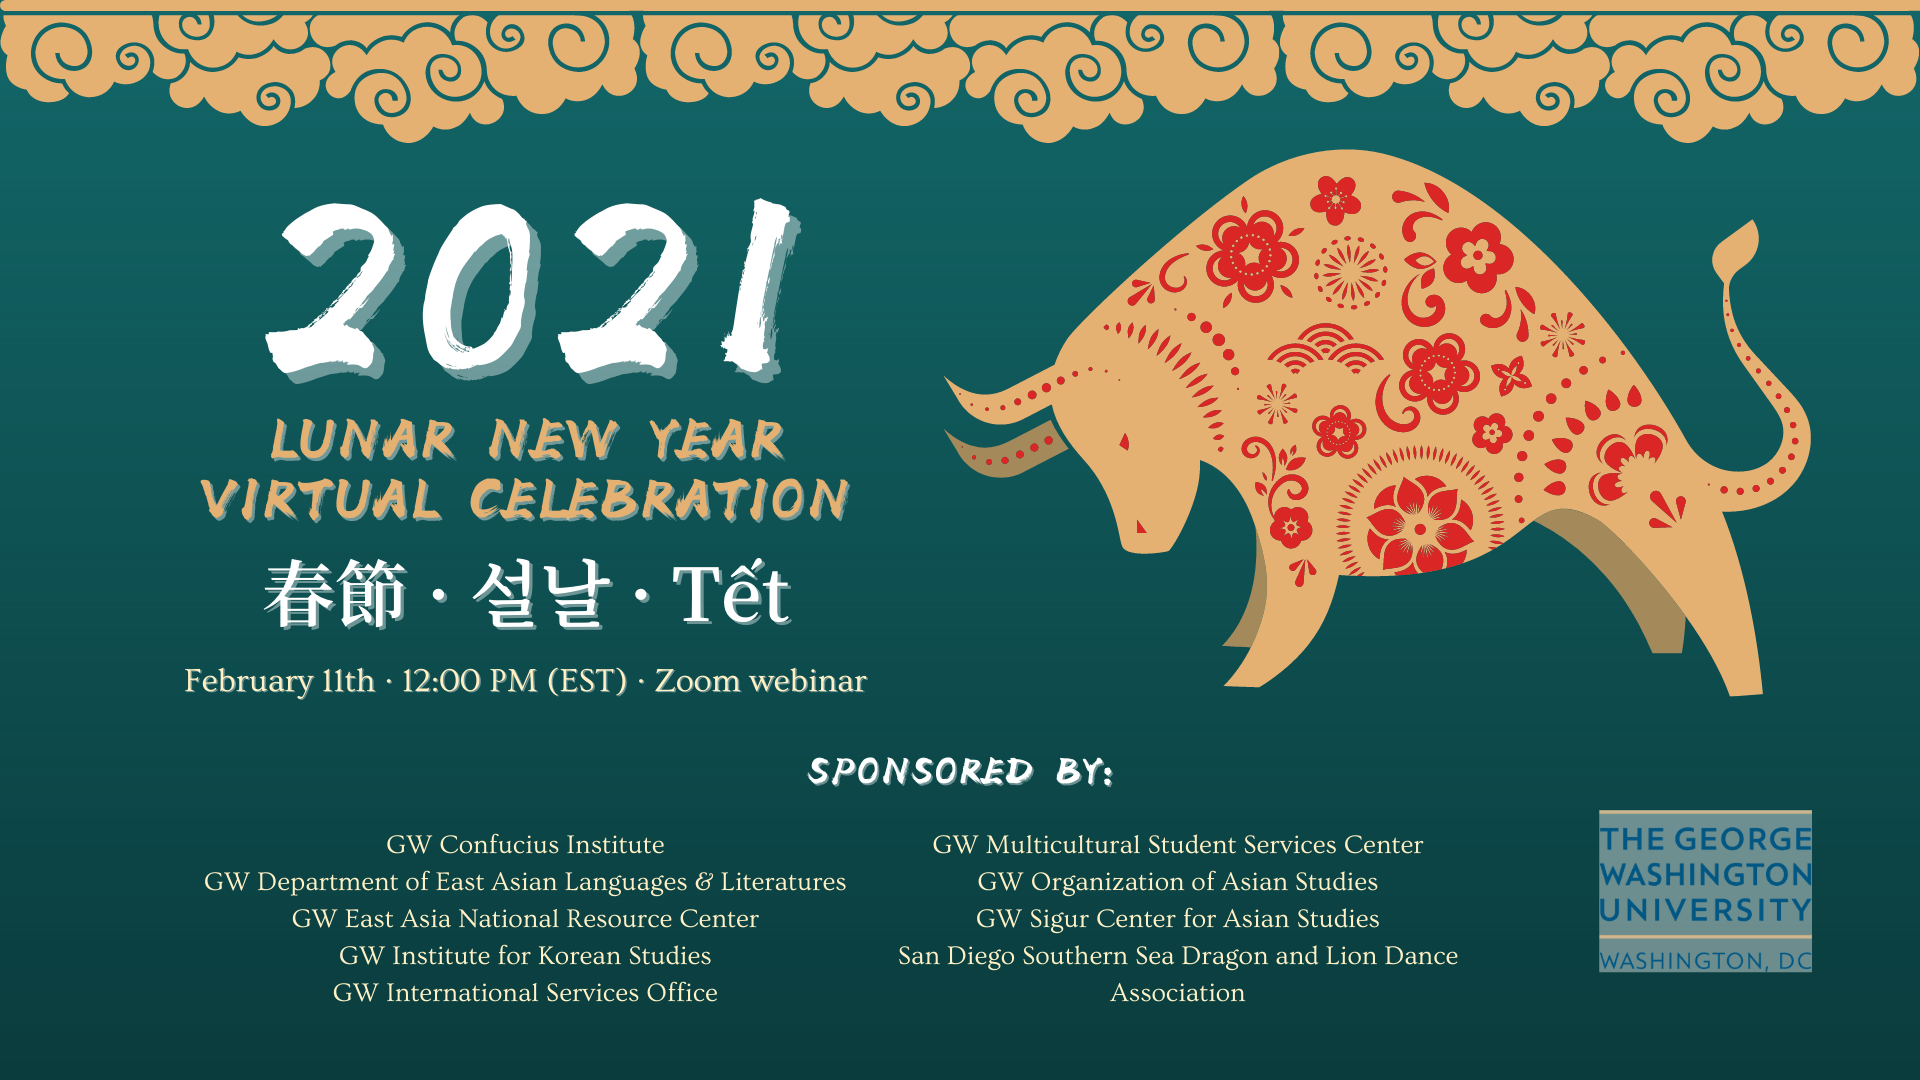 event flyer with bull stock art; text: 2021 Lunar New Year Virtual Celebration